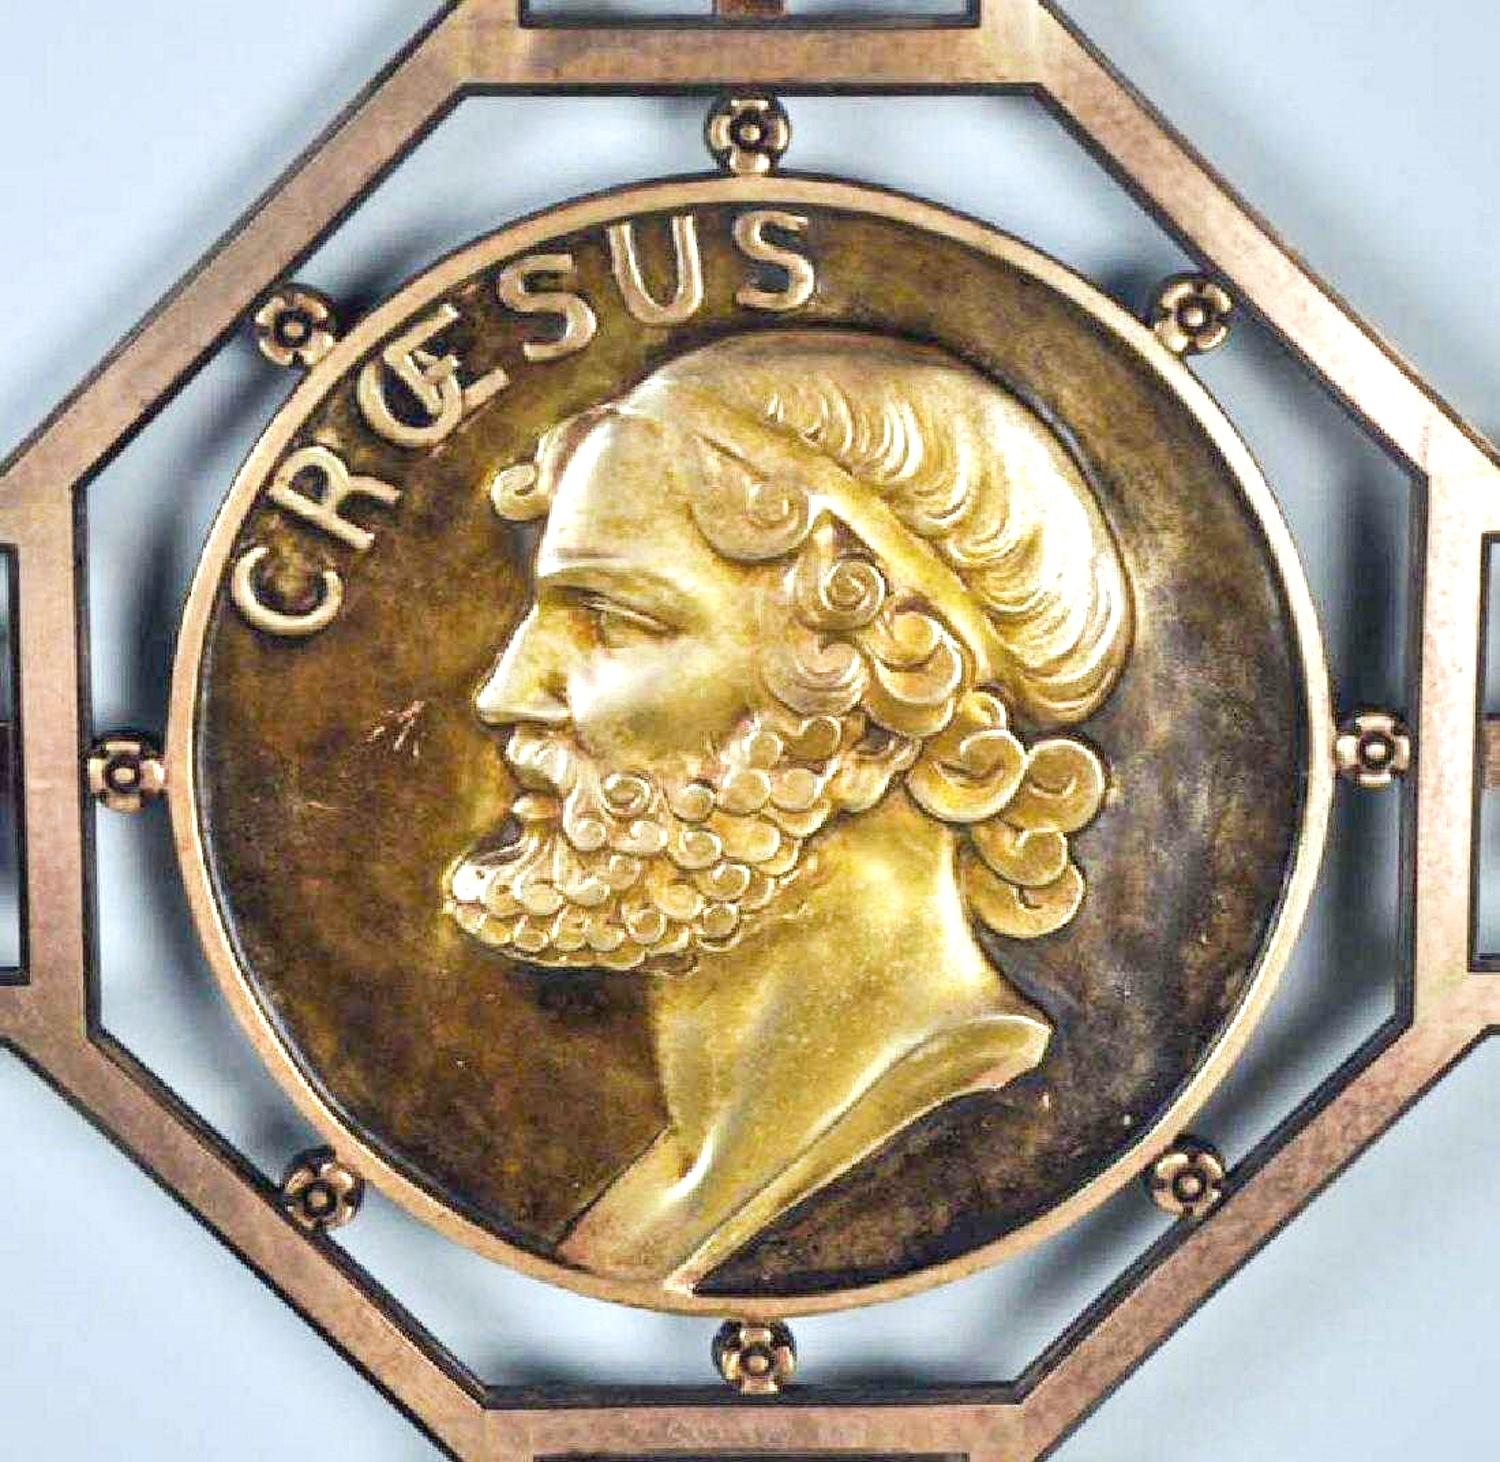 This luxury decorative and heavy bronze partition screen is designed in an artistic, creative Art Deco style. A gilded bronze medallion with the image of King Croesus is placed in the cross point of the screen. The casting is of highest quality.